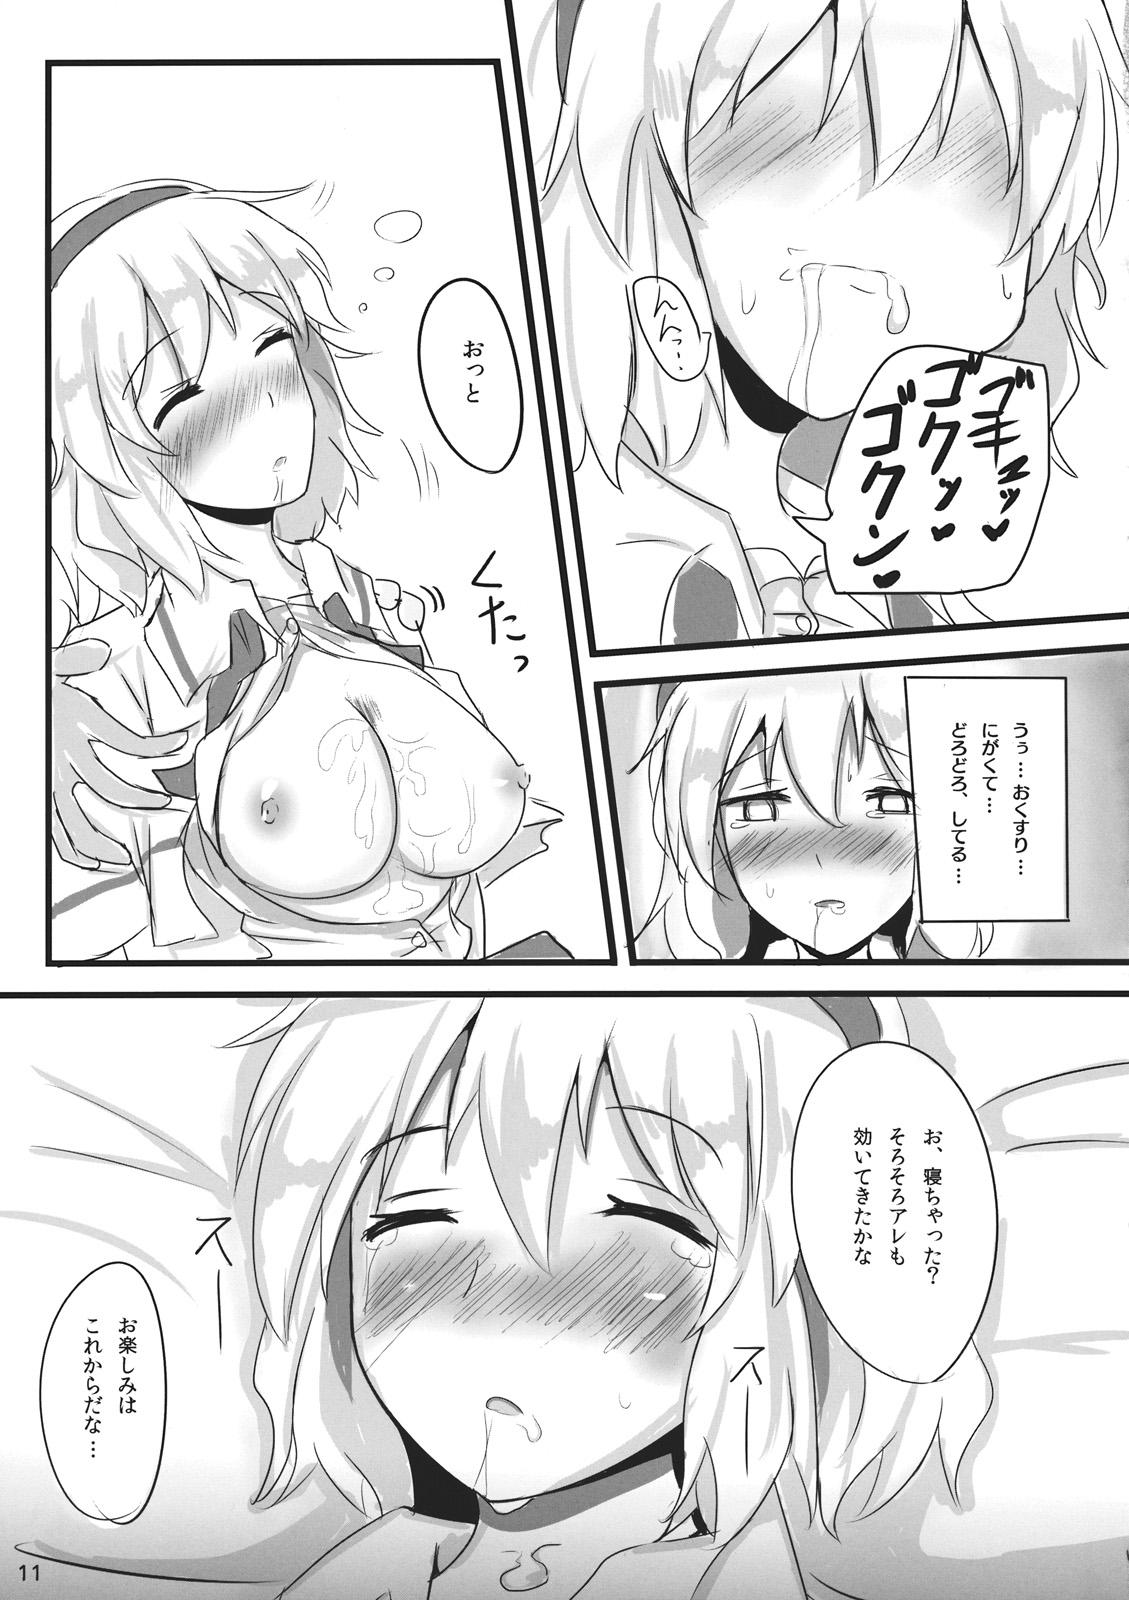 Sex Toy Nanairo Syndrome - Touhou project Lovers - Page 11